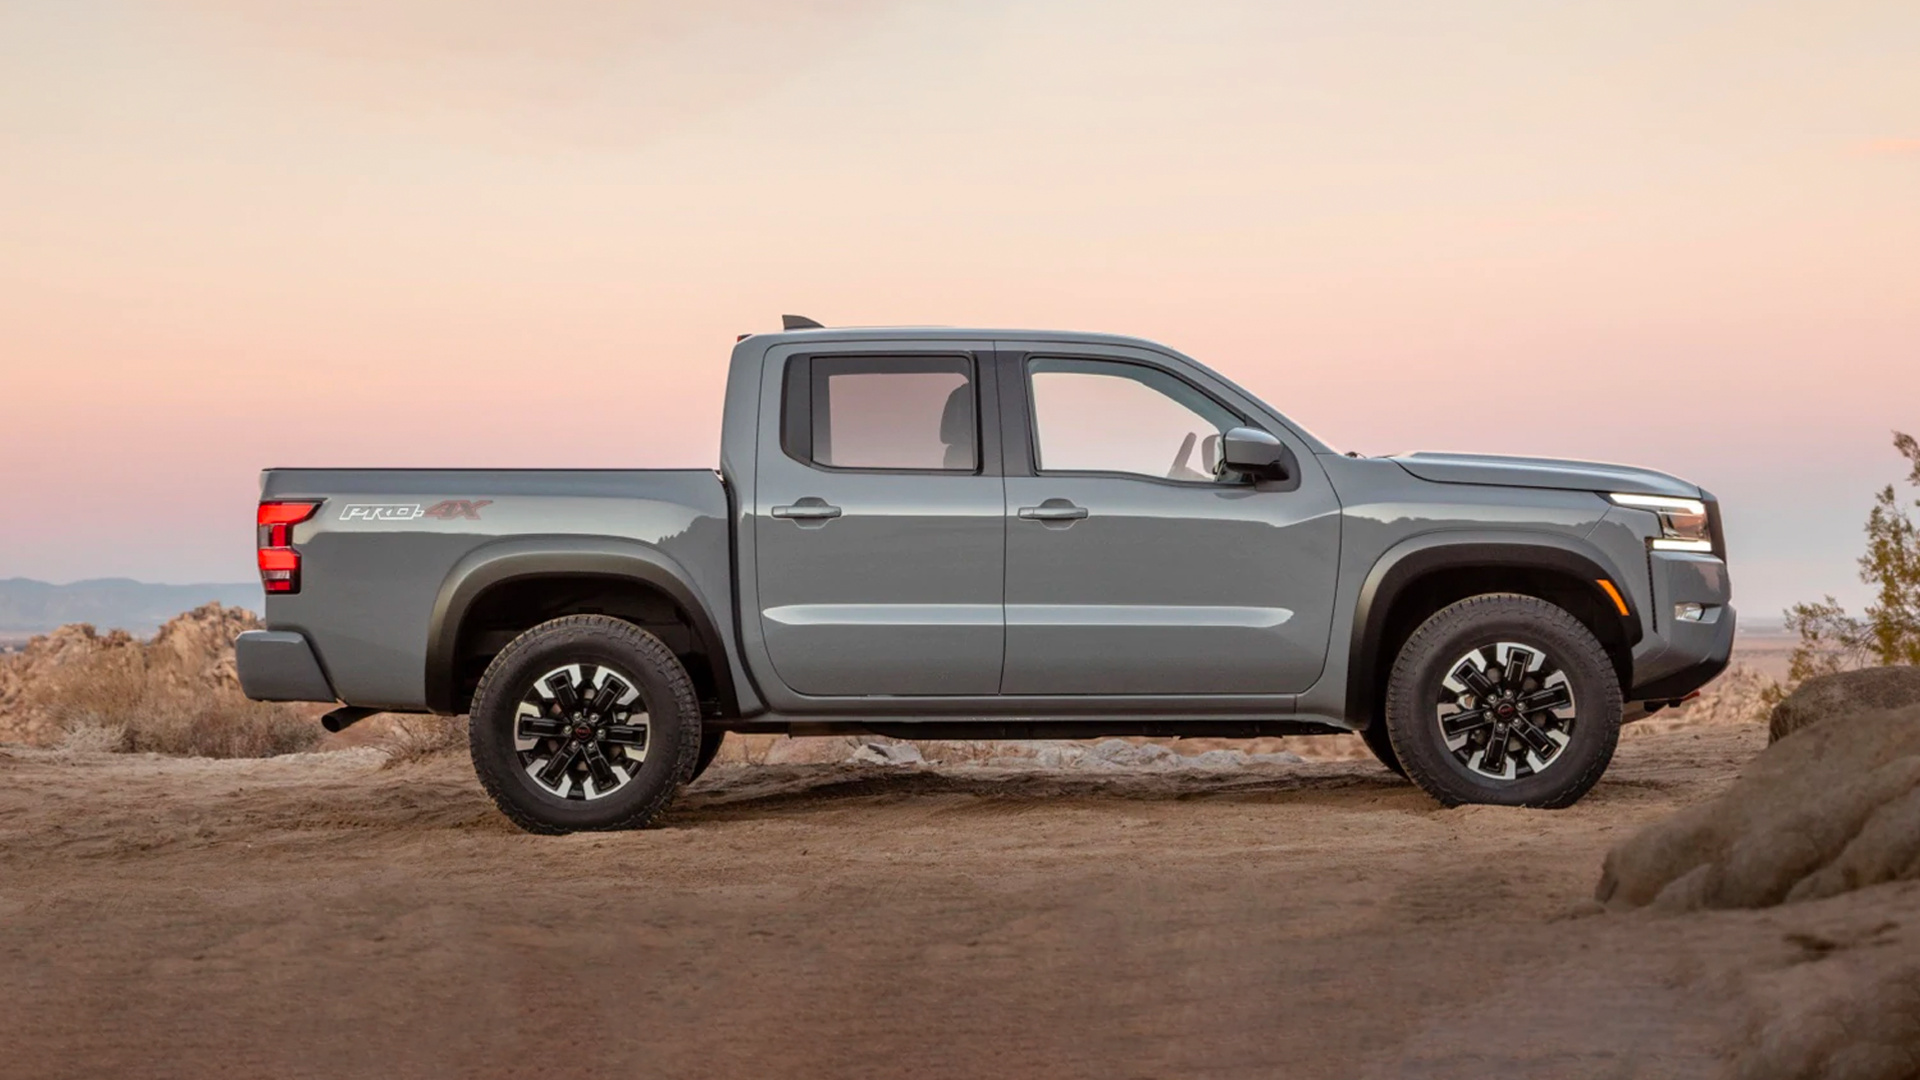 Next generation 2022 Nissan Frontier, Executive model, Redesigned features, 1920x1080 Full HD Desktop